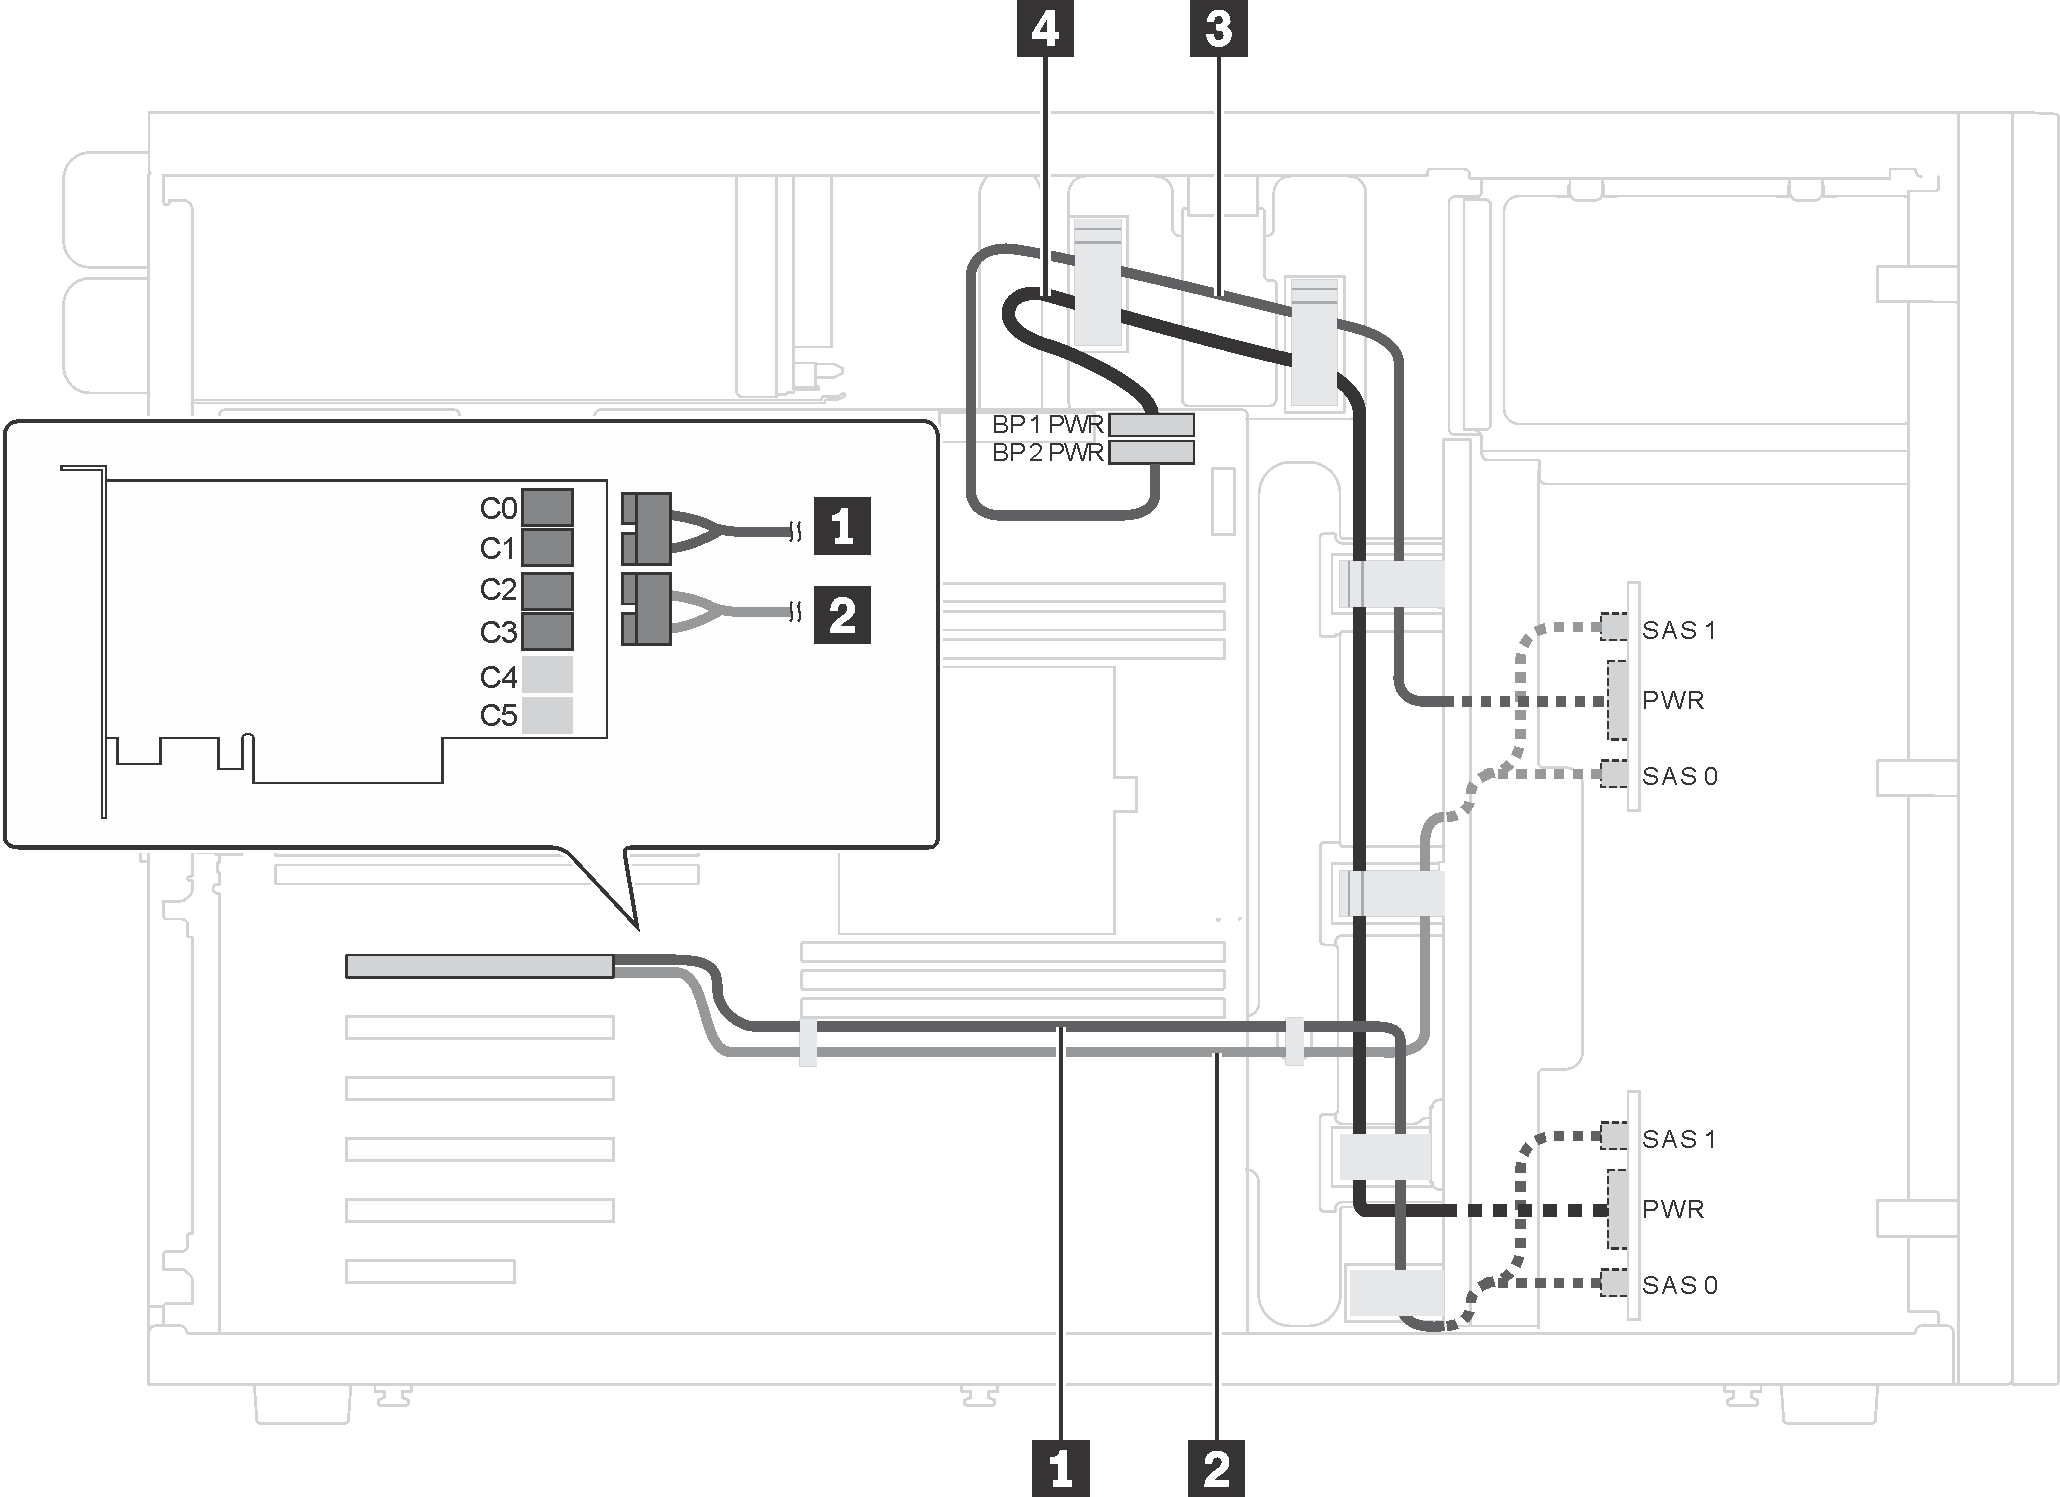 Cable routing for server models with sixteen 2.5-inch SAS/SATA drives and one 24i RAID adapter